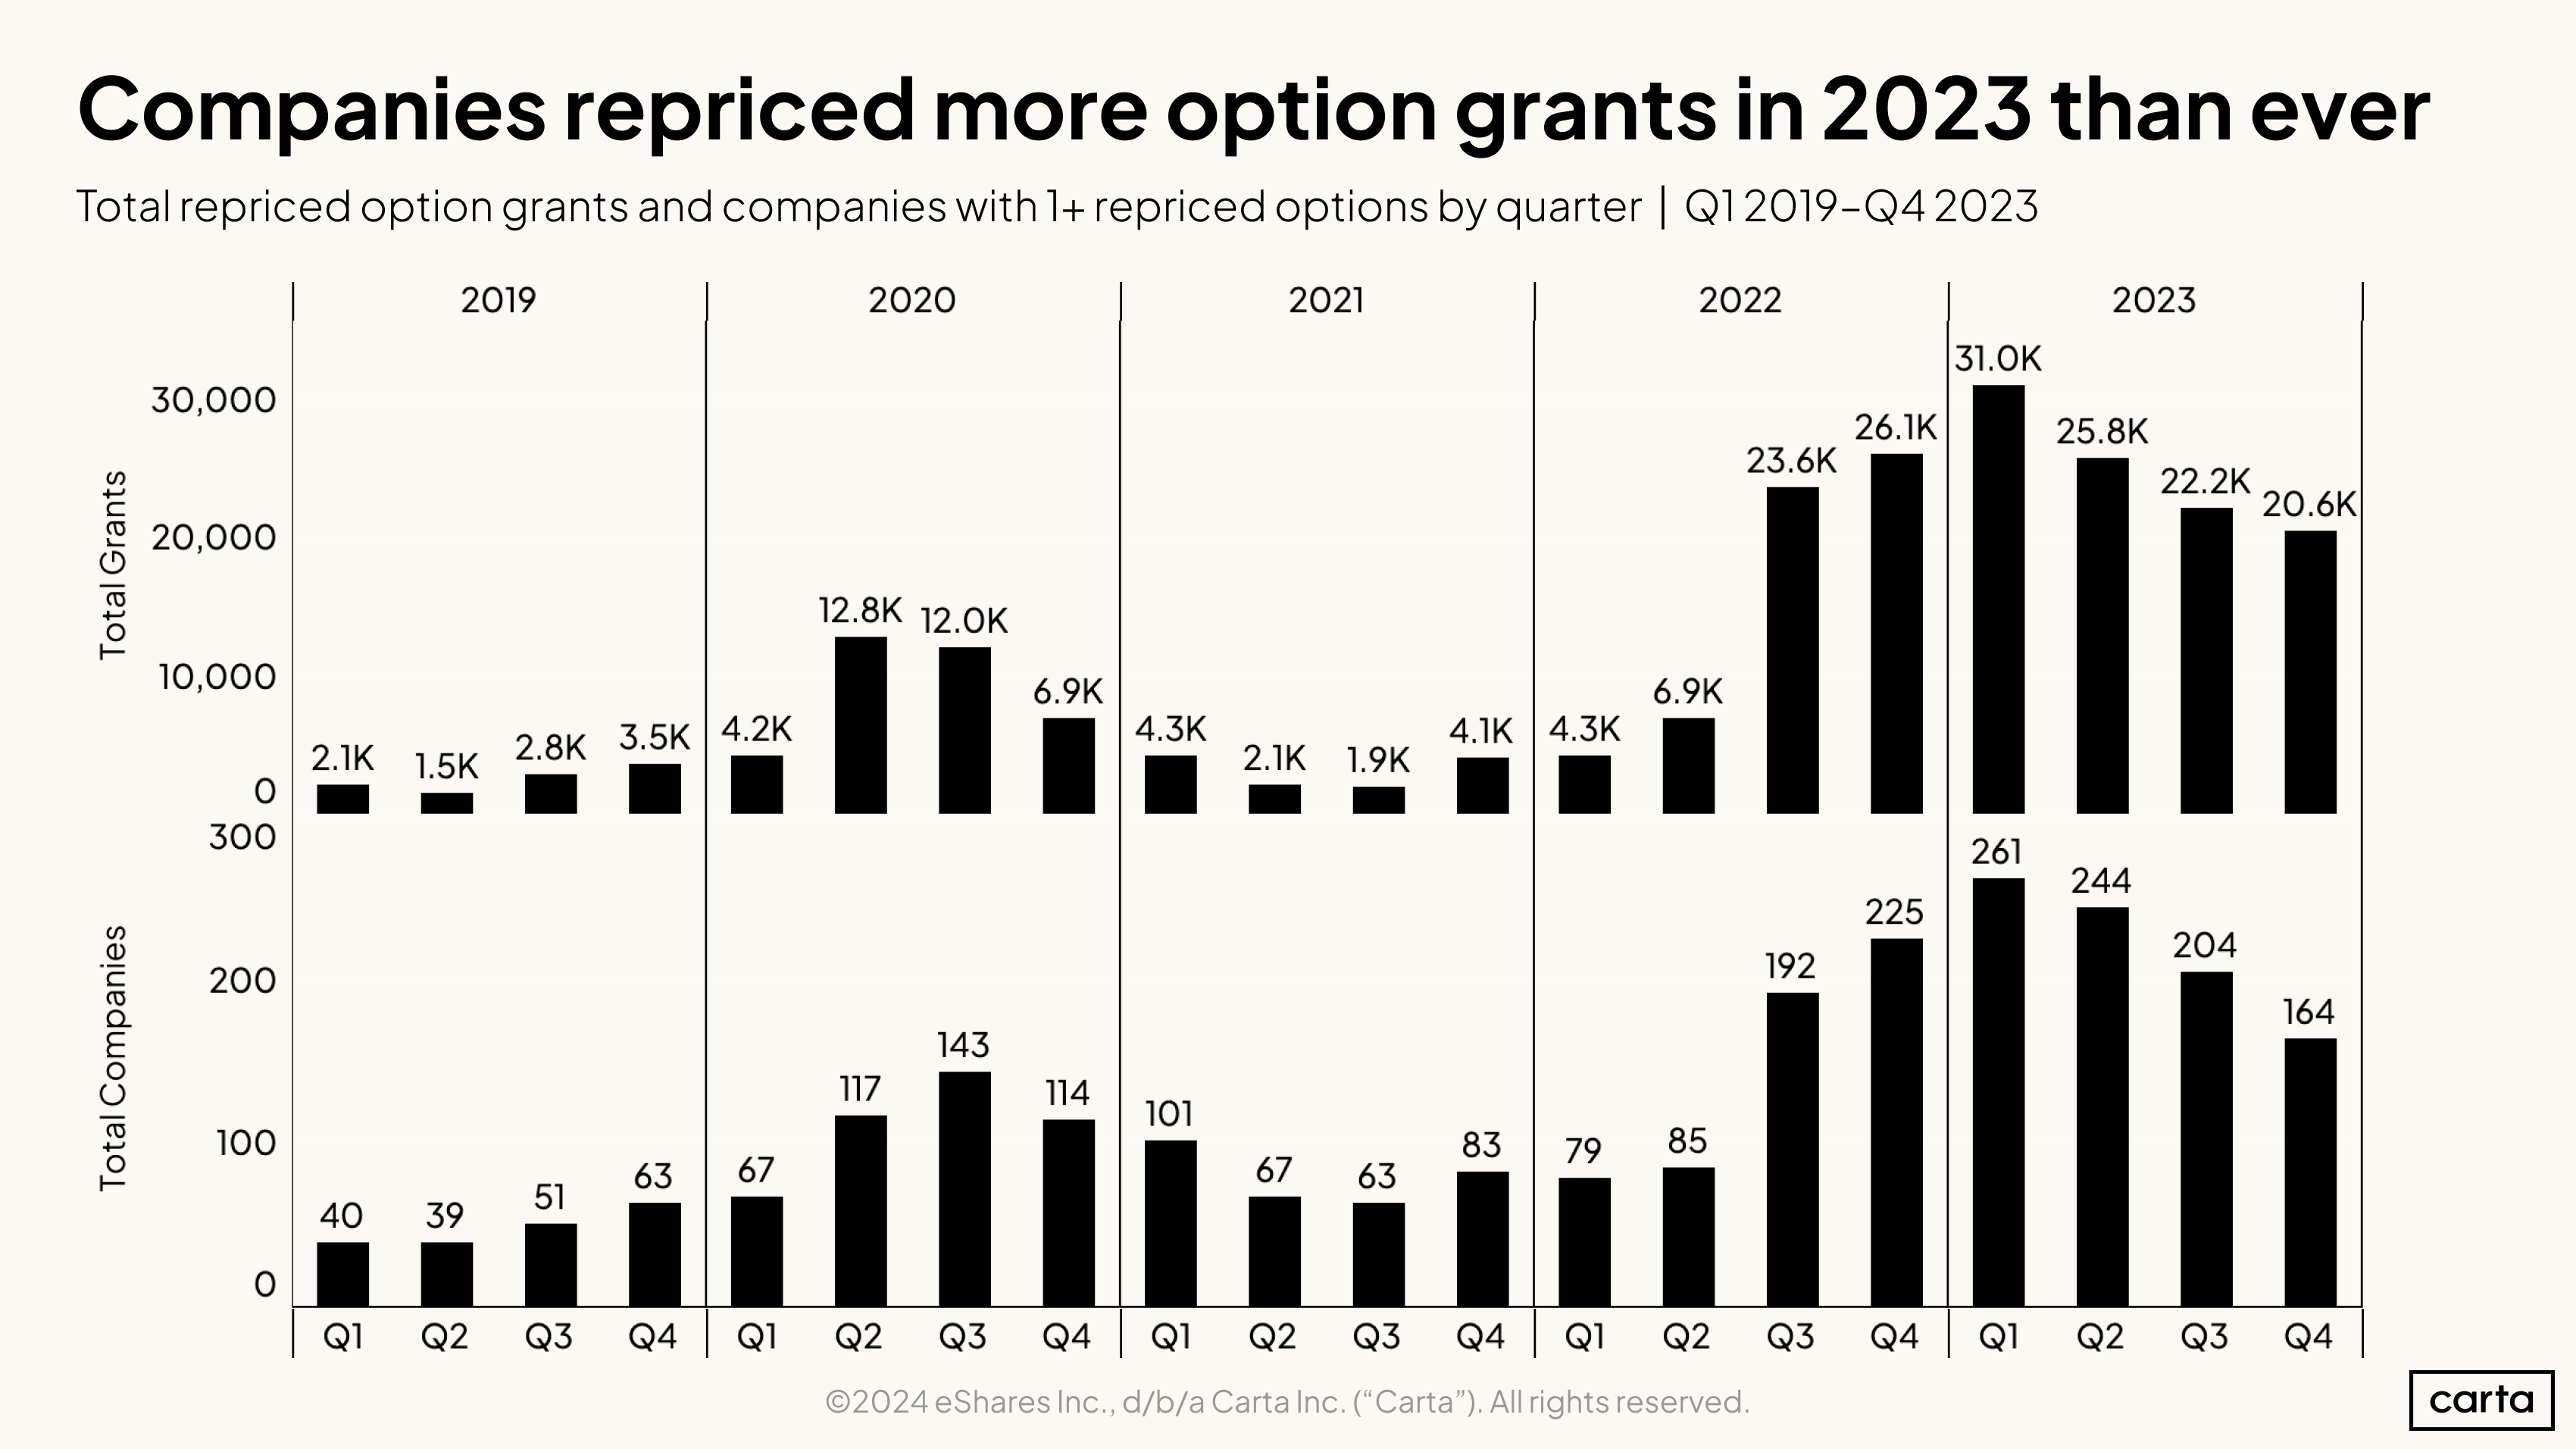 Companies repriced more option grants in 2023 than ever